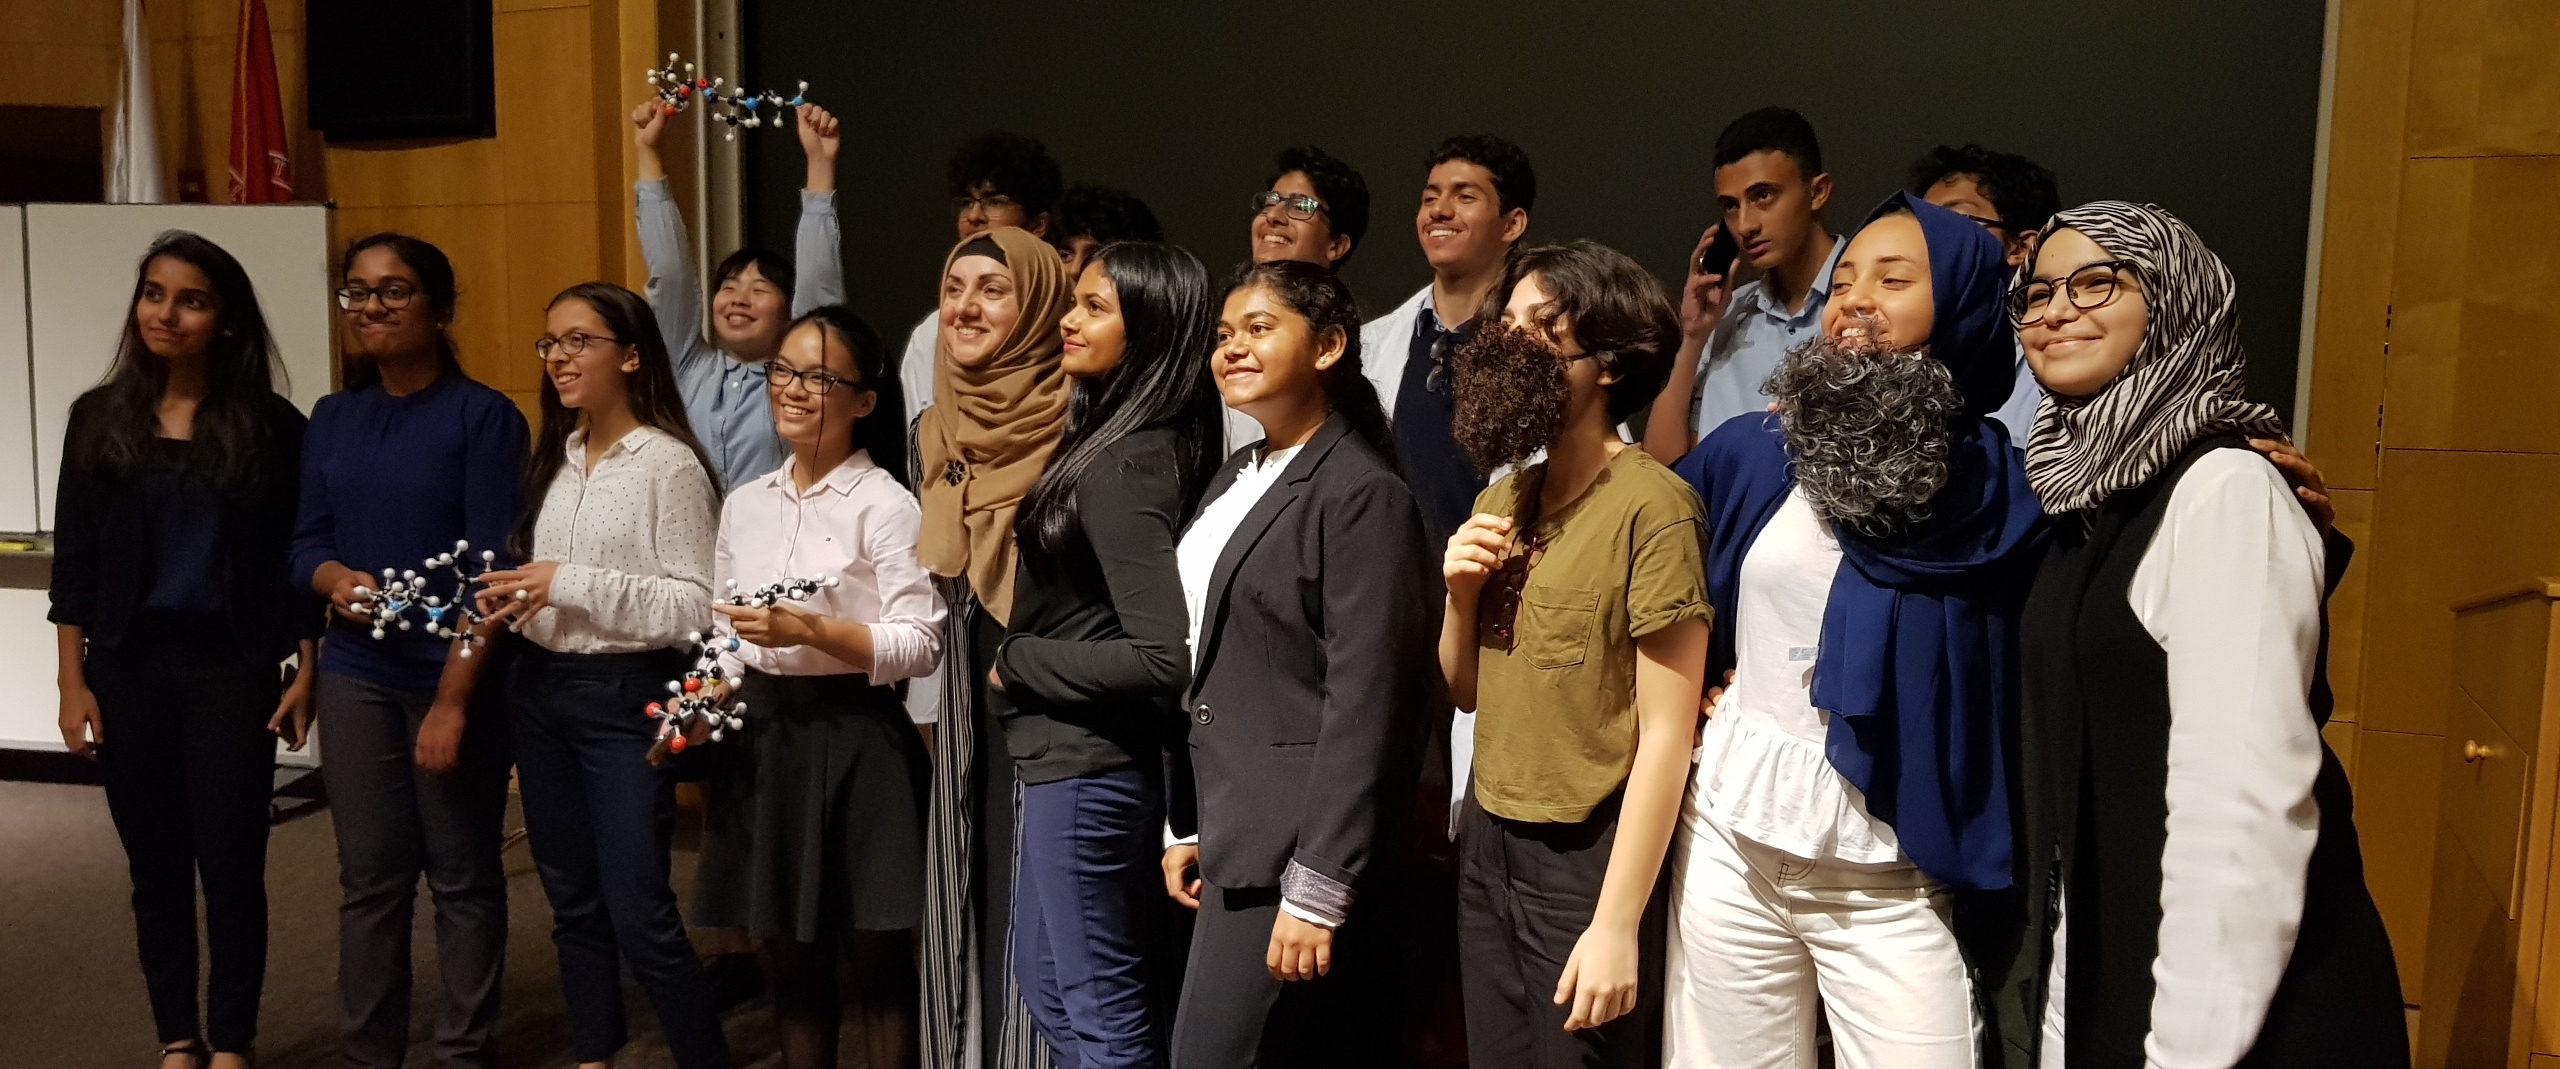 Students from high schools across Qatar attended the symposium to participate in a presentation competition.